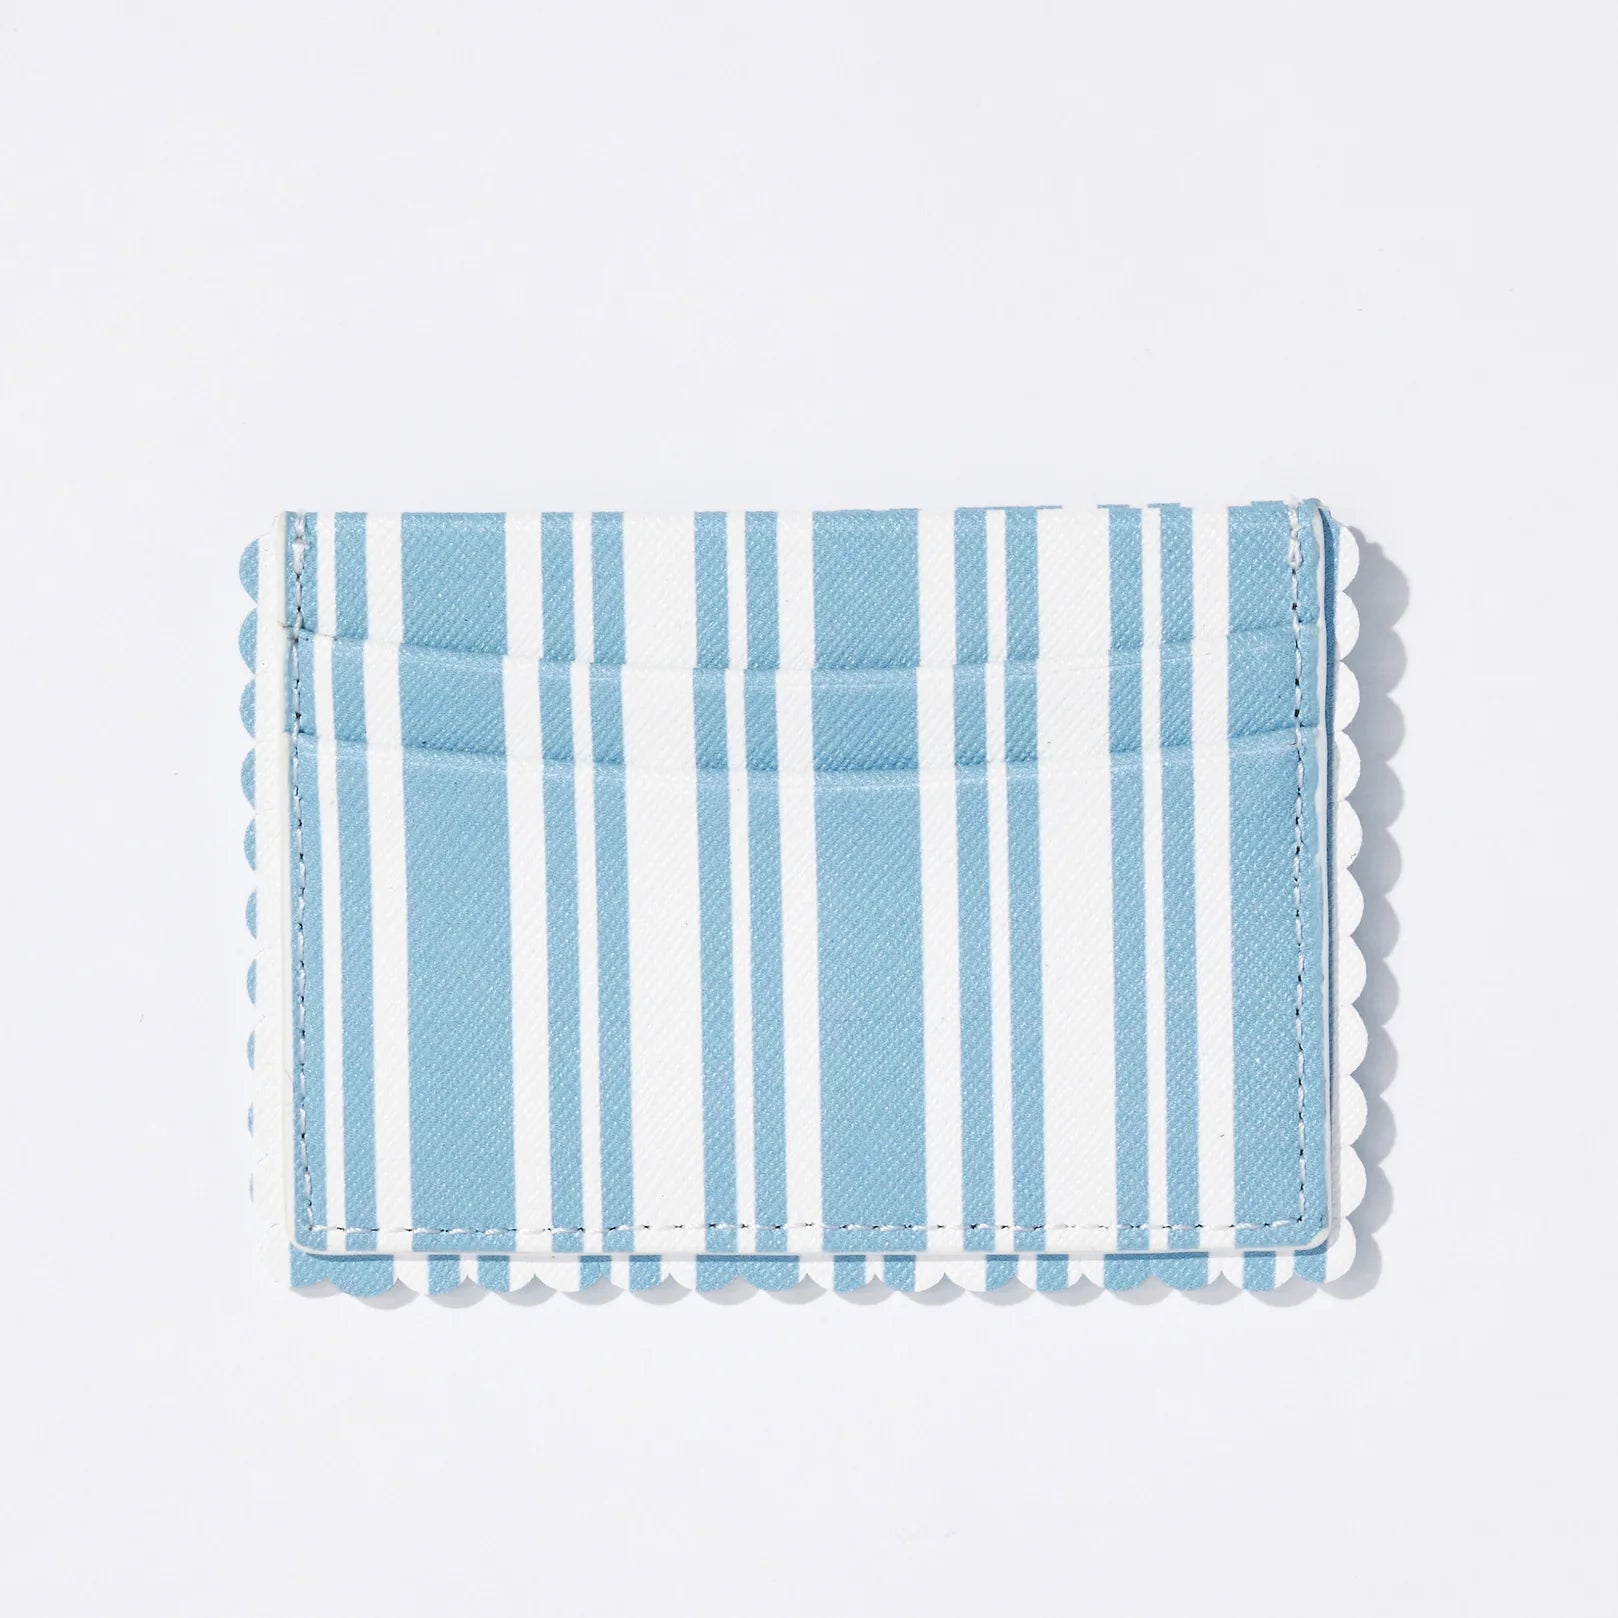 Neely & Chloe Carly Scallop Card Case